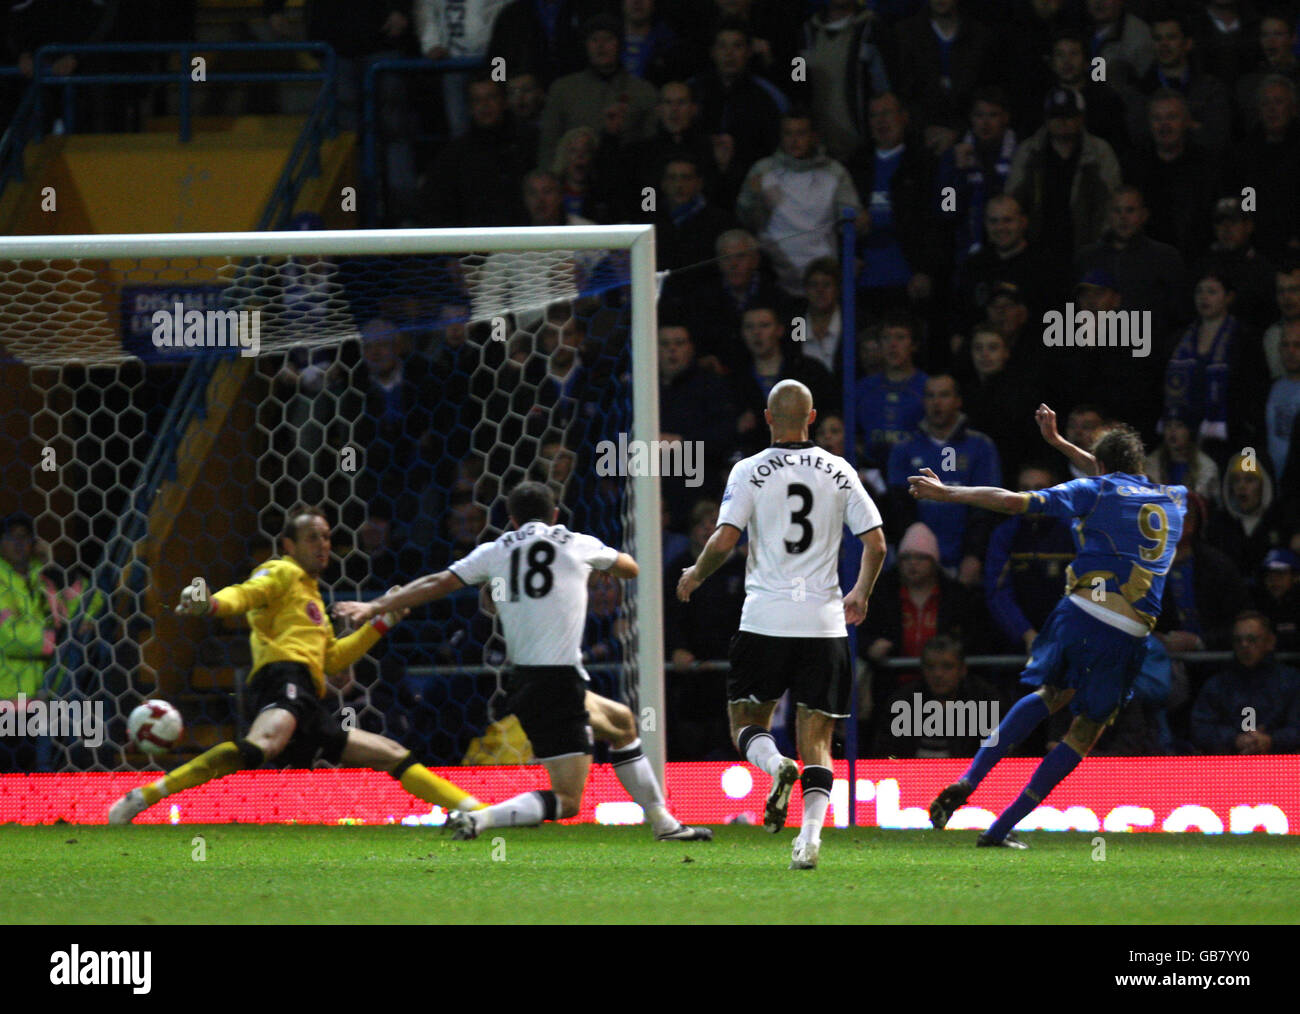 Portsmouth's Peter Crouch puts his team 1-0 up with a shot past Fulham goalkeeper Mark Schwarzer Stock Photo